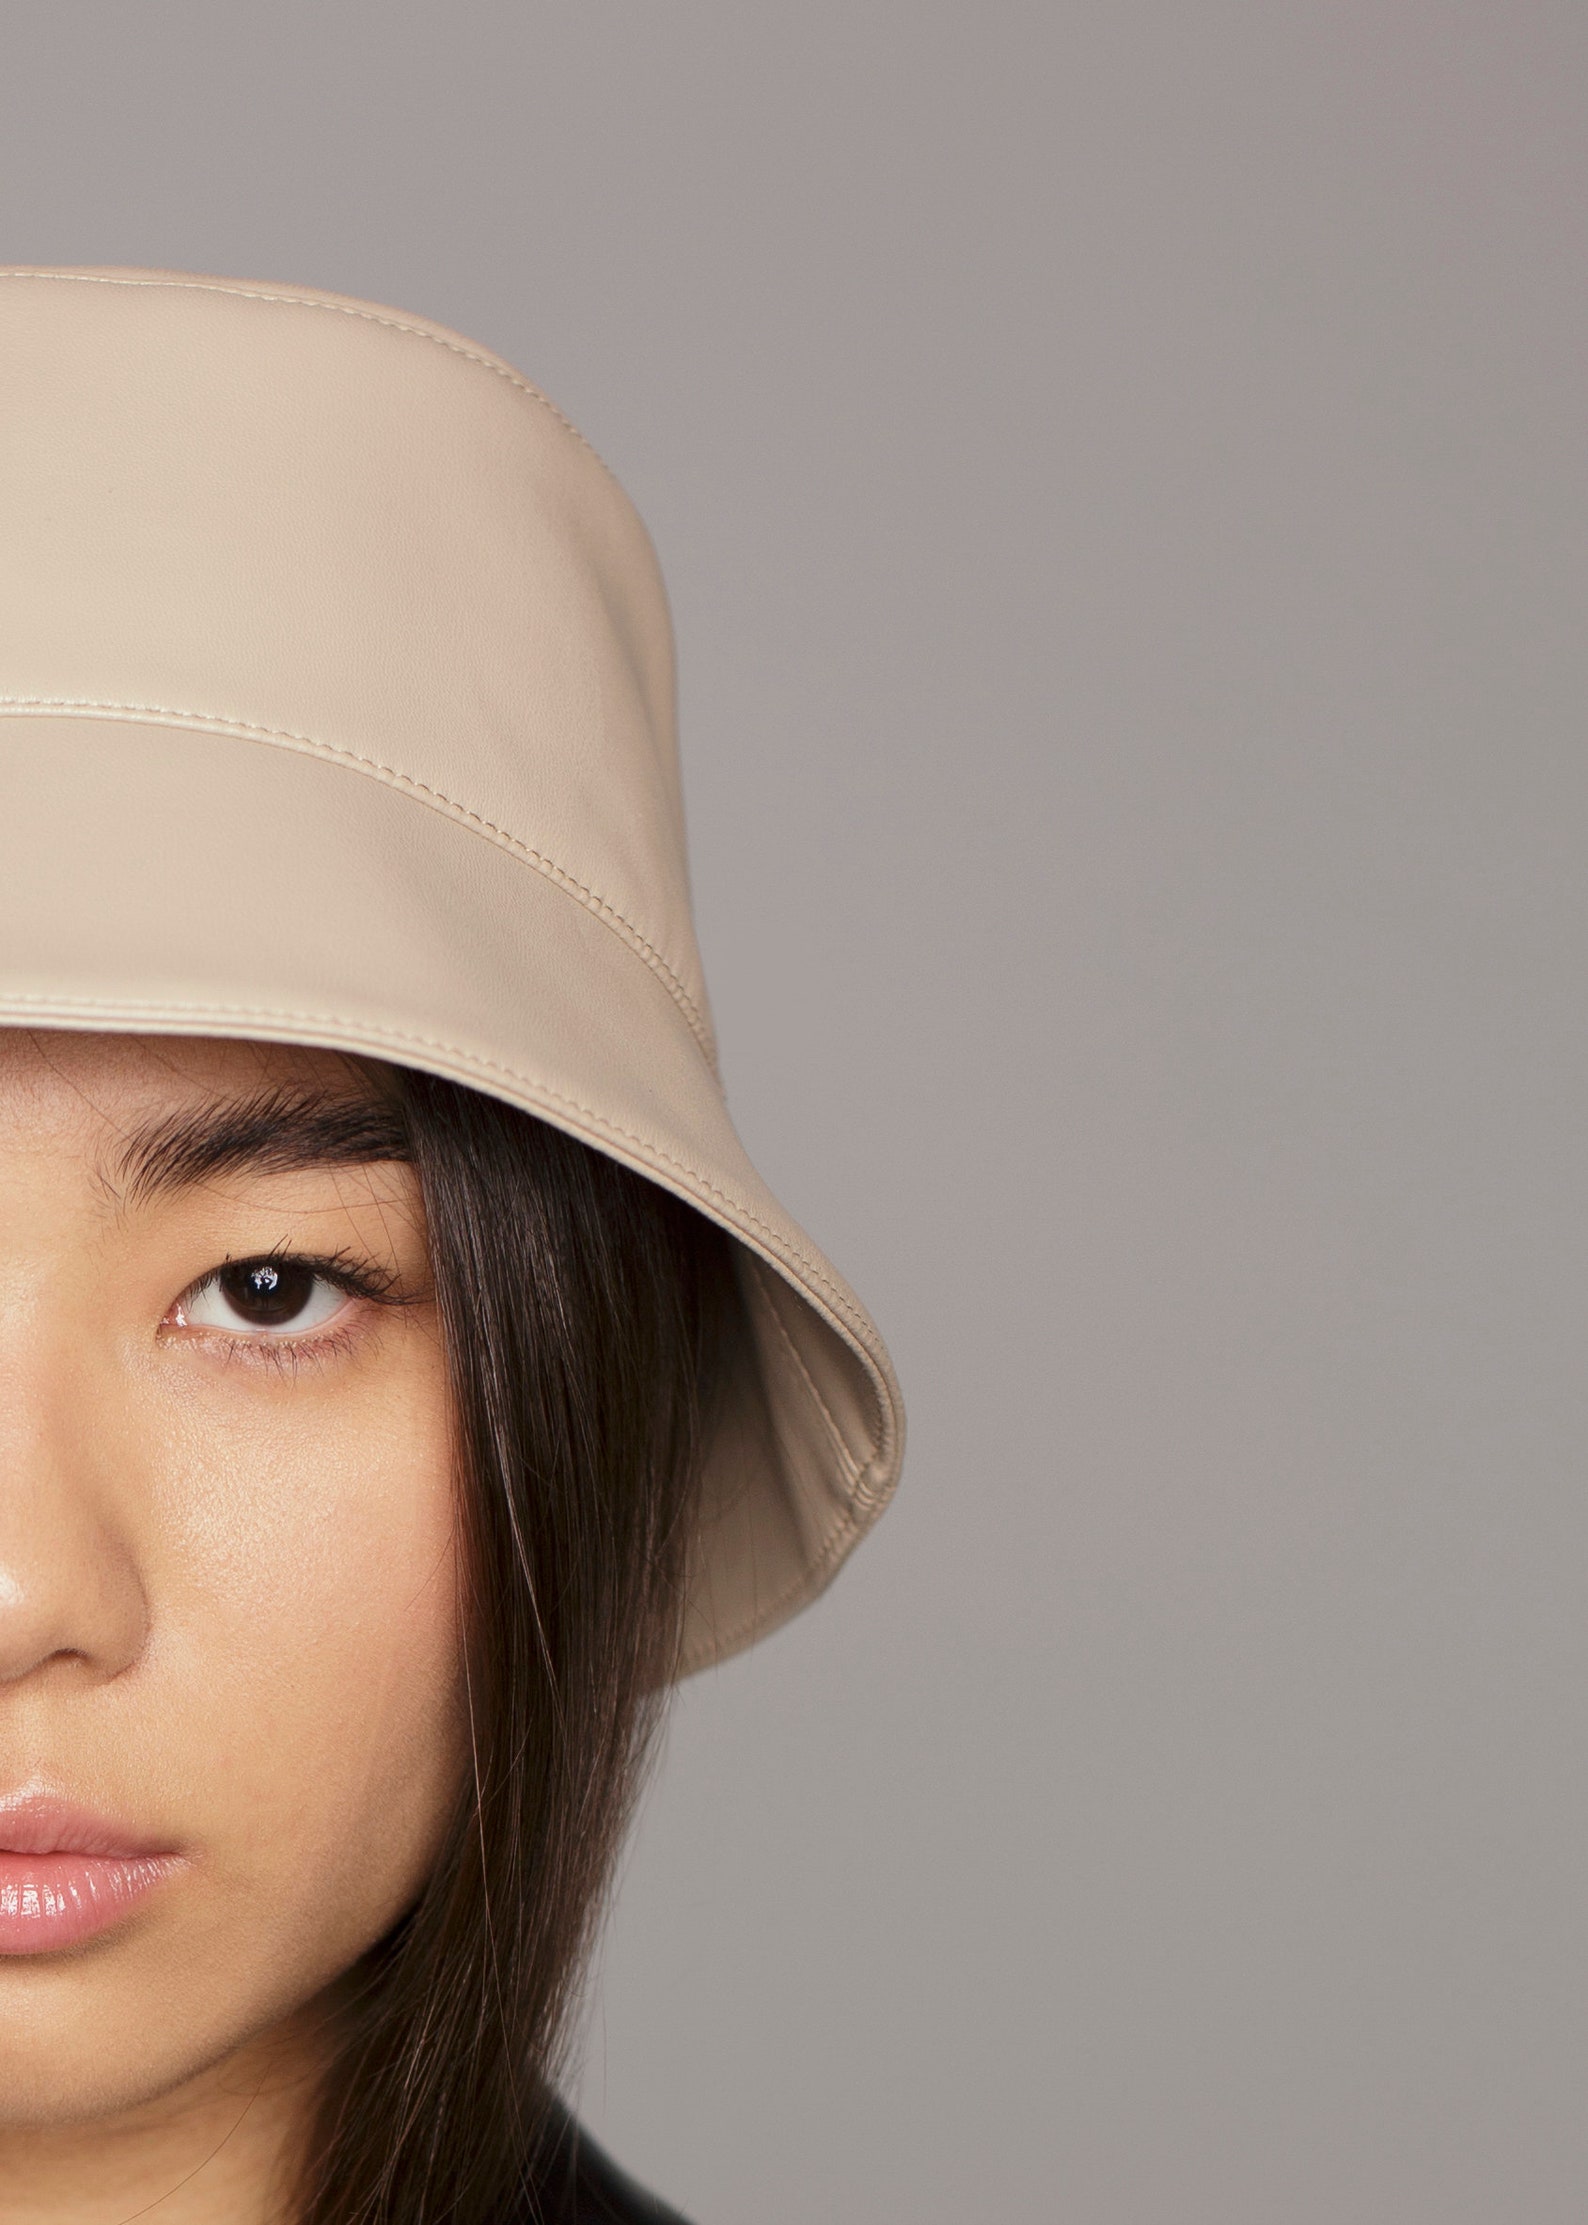 Beige Leather Bucket Hat Influencer Hat Unusual Hat for Her - Etsy